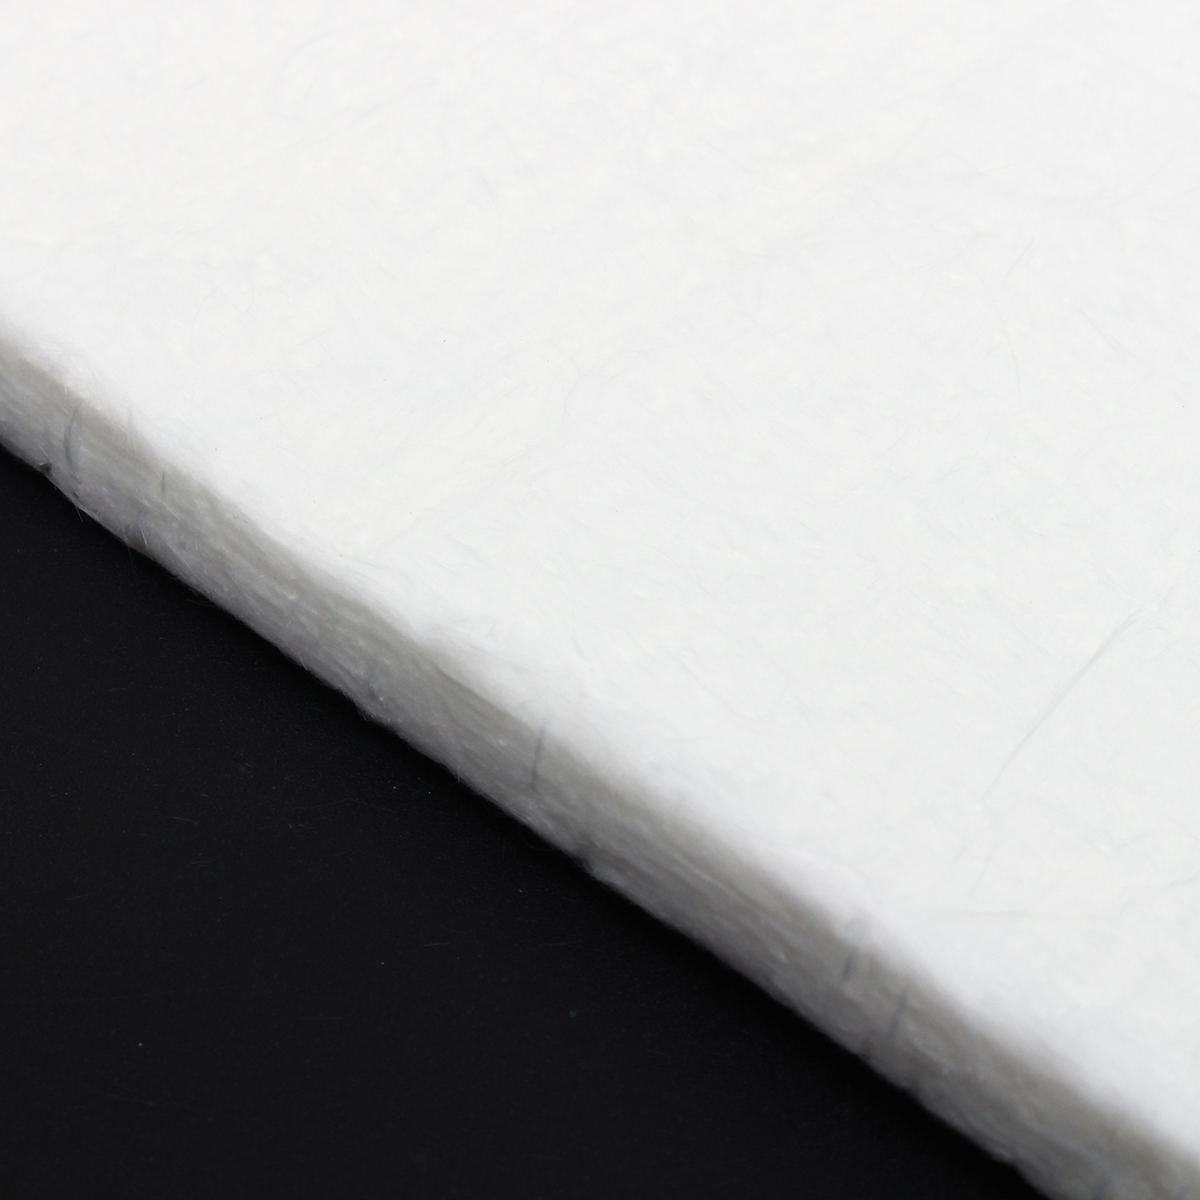 3610mm-Aerogel-Insulation-Hydrophobic-Mat-Foot-Low-to-High-Temp-20x15cm-Water-Pipe-Insulation-Mat-1321399-7